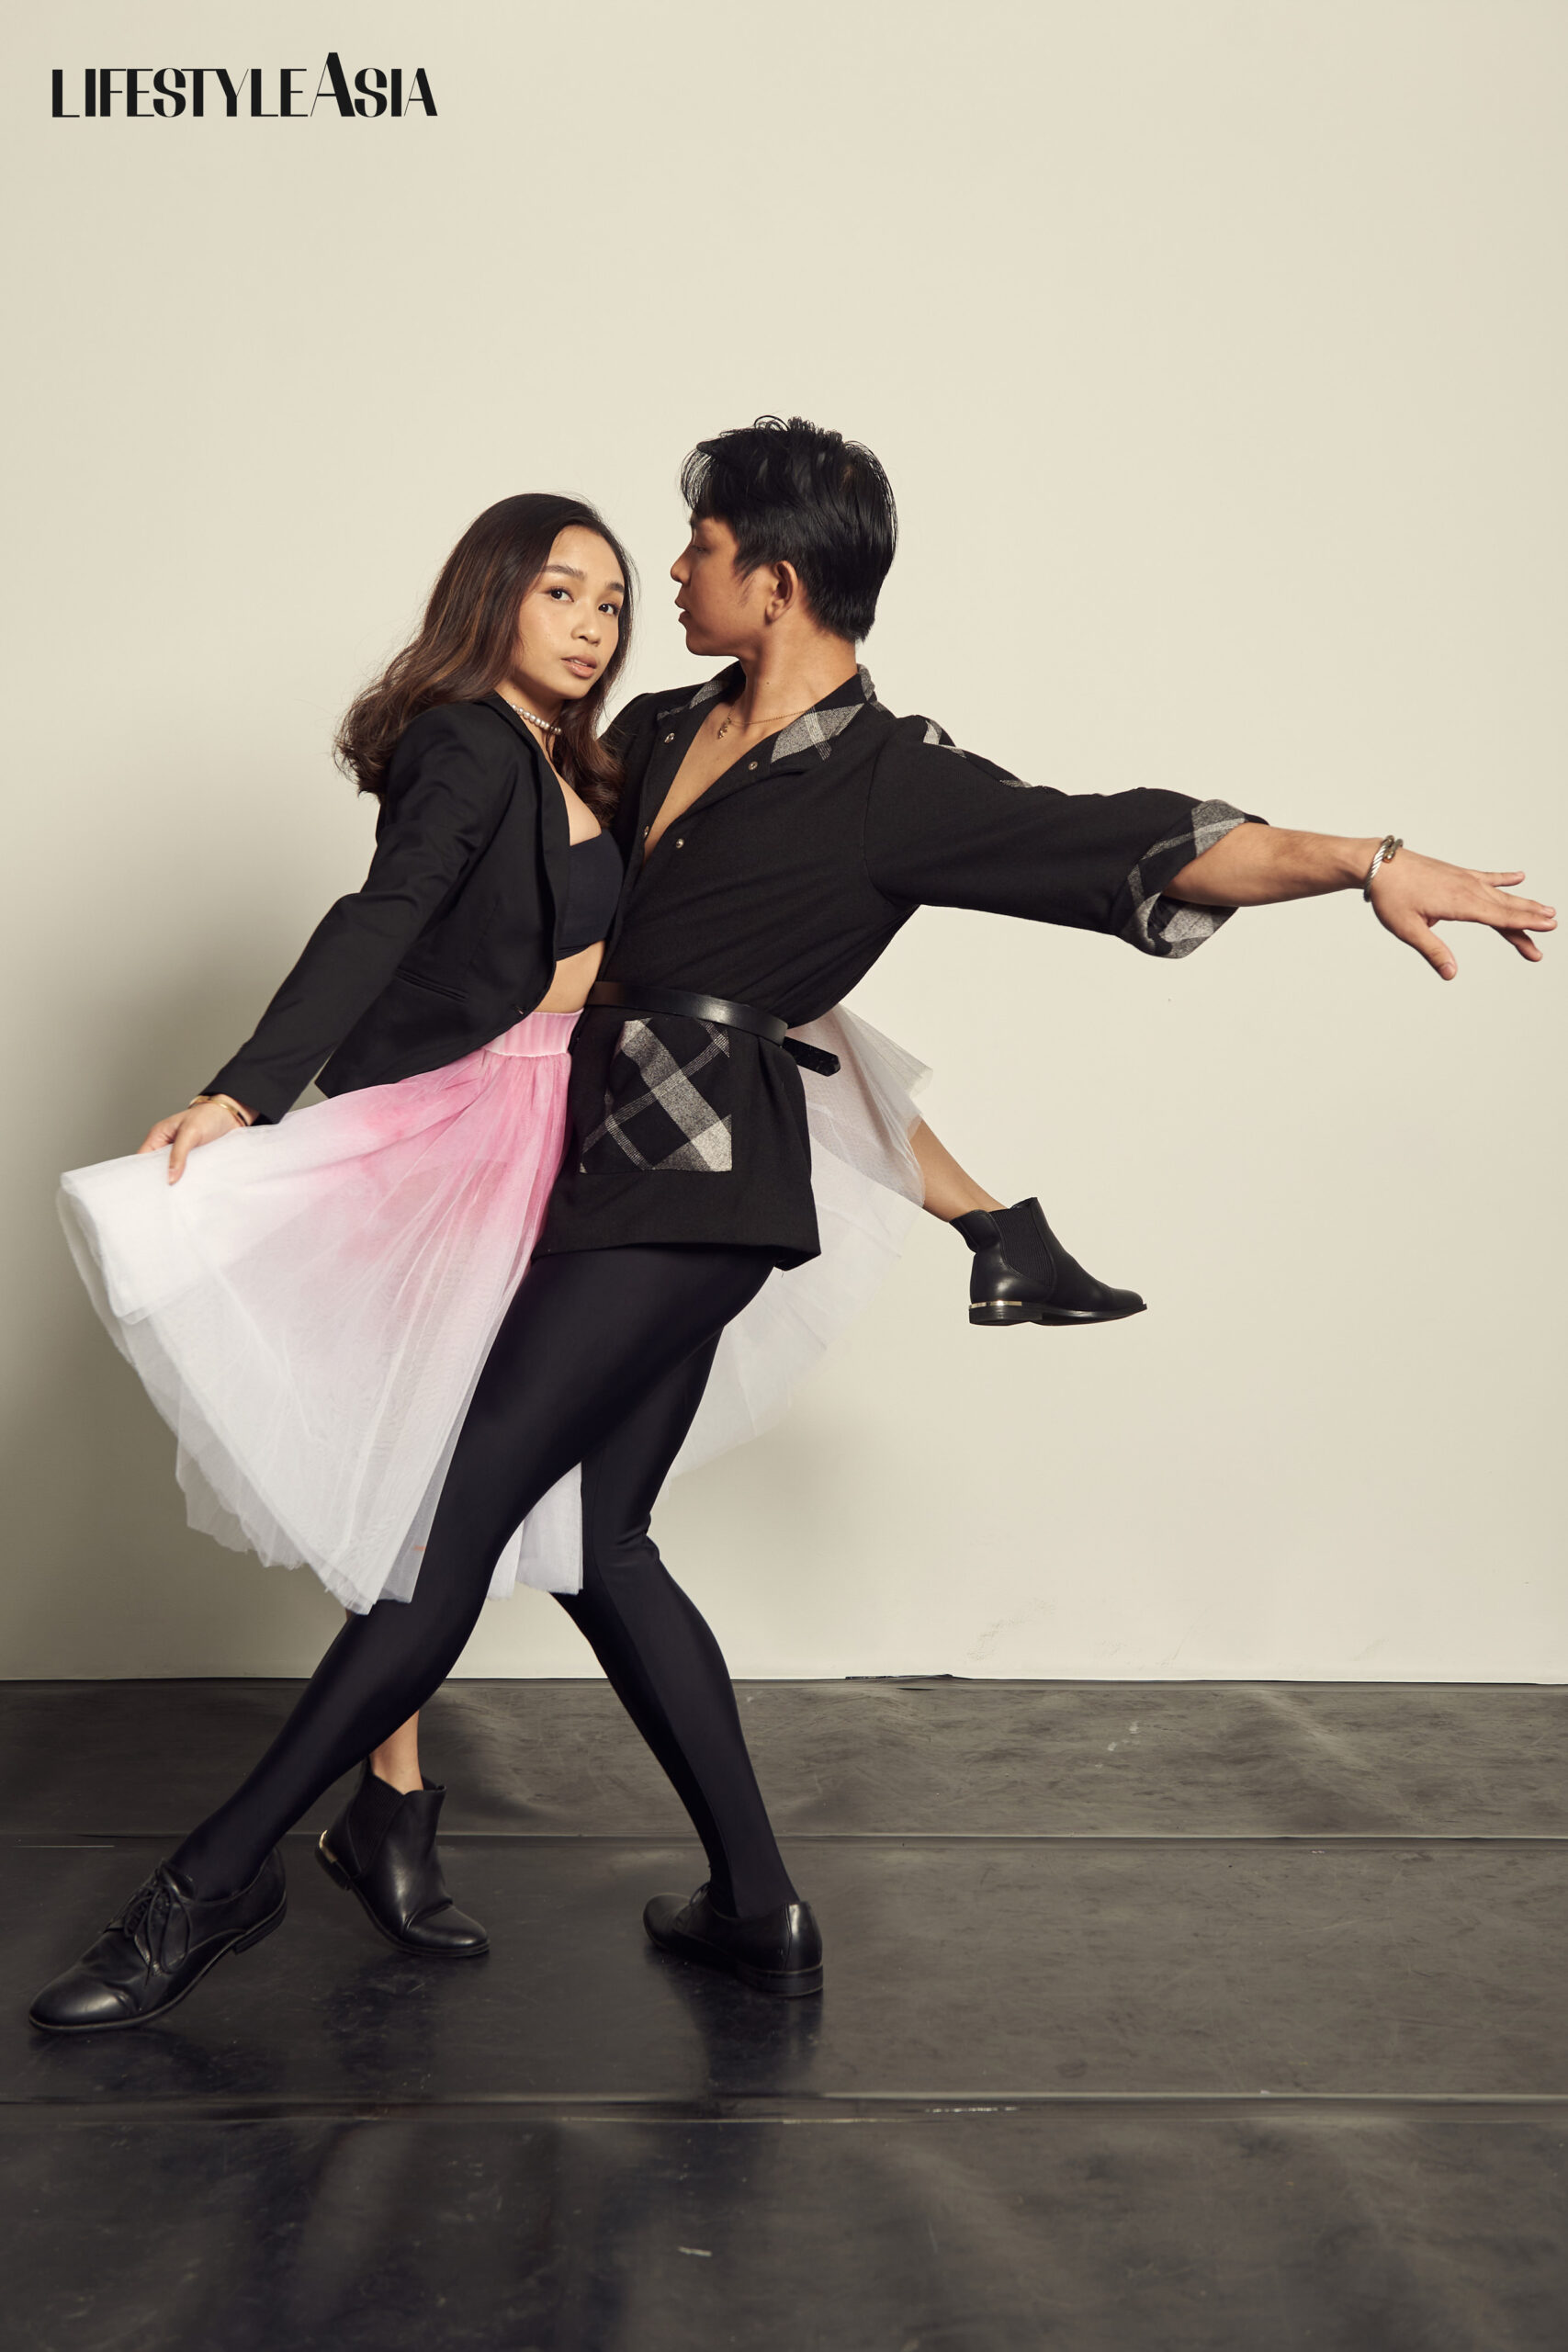 Ocampo and Reyes are principal dancers of Ballet Philippines, starring in many of the company's productions